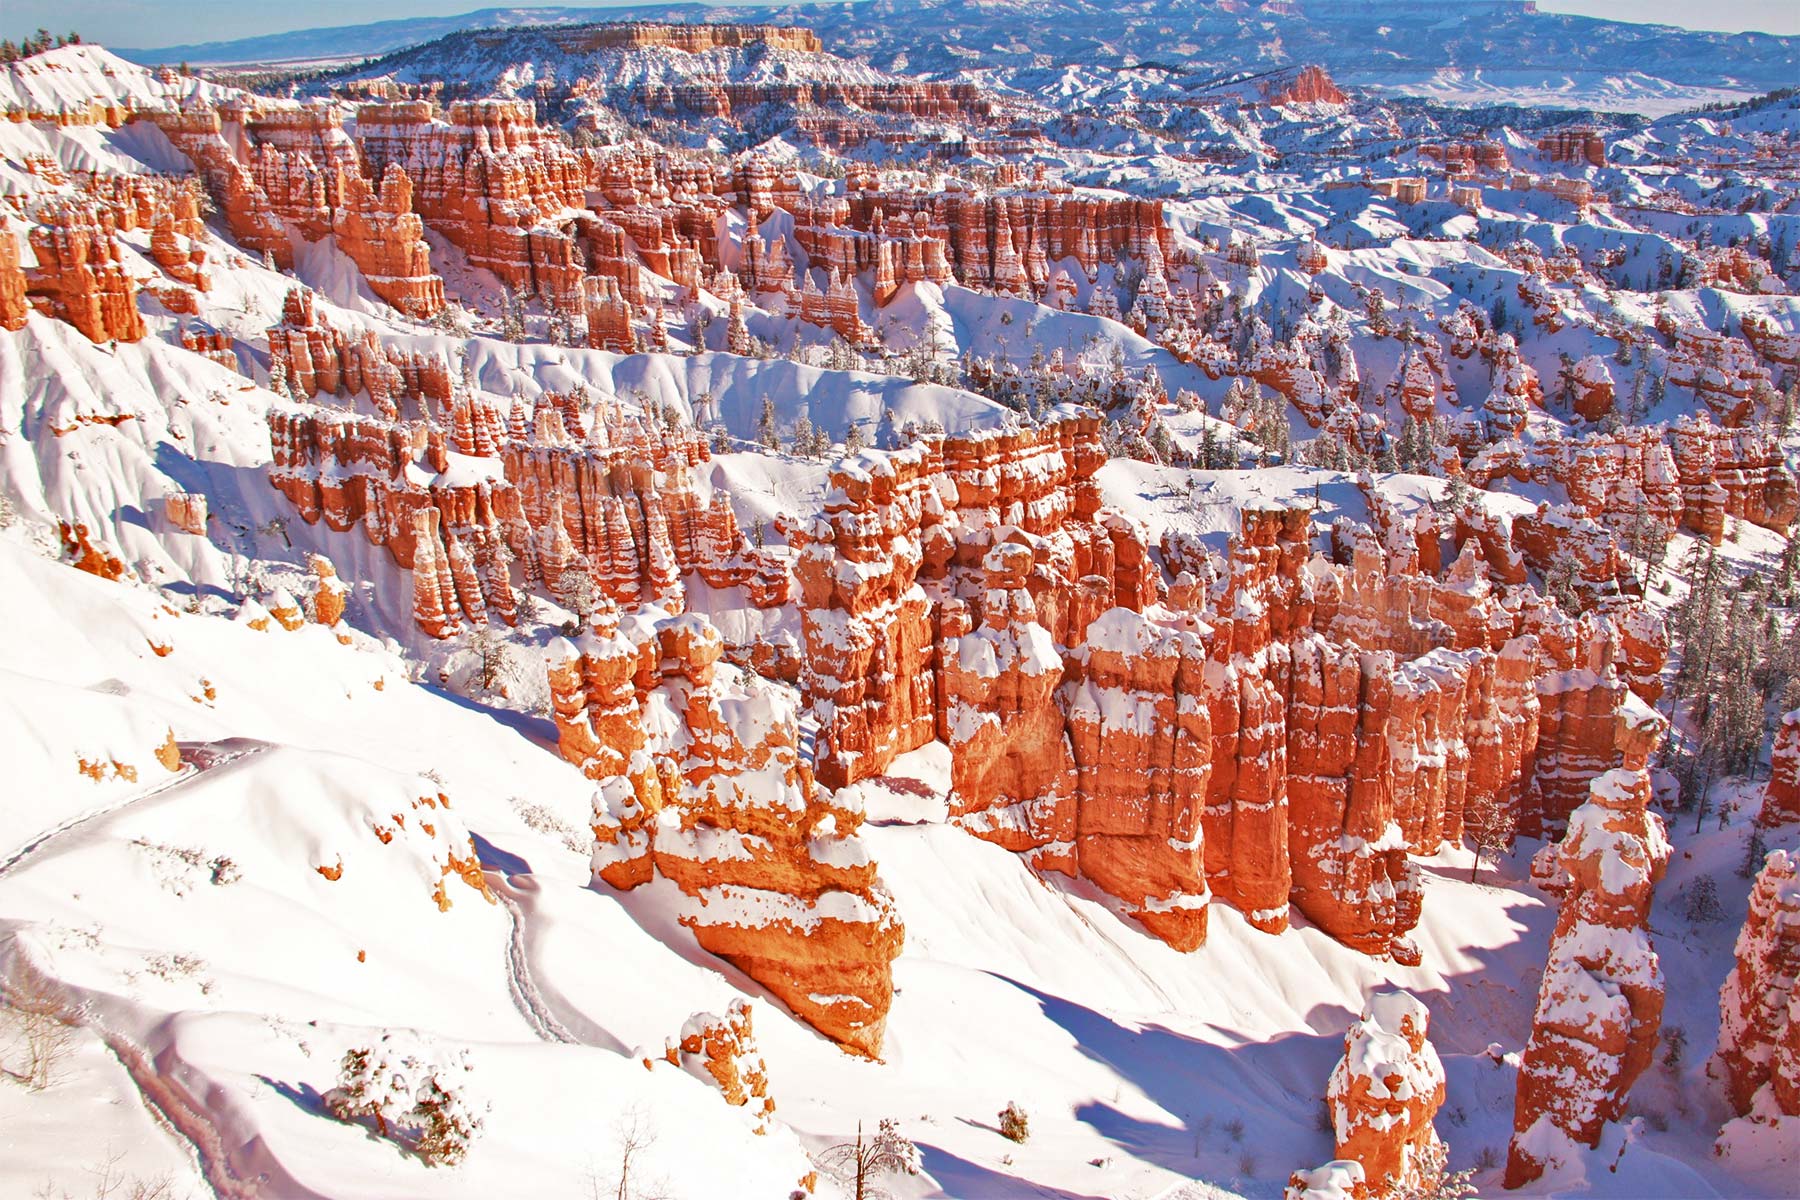 bryce canyon in winter, winter bryce canyon national park utah, bryce canyon snow